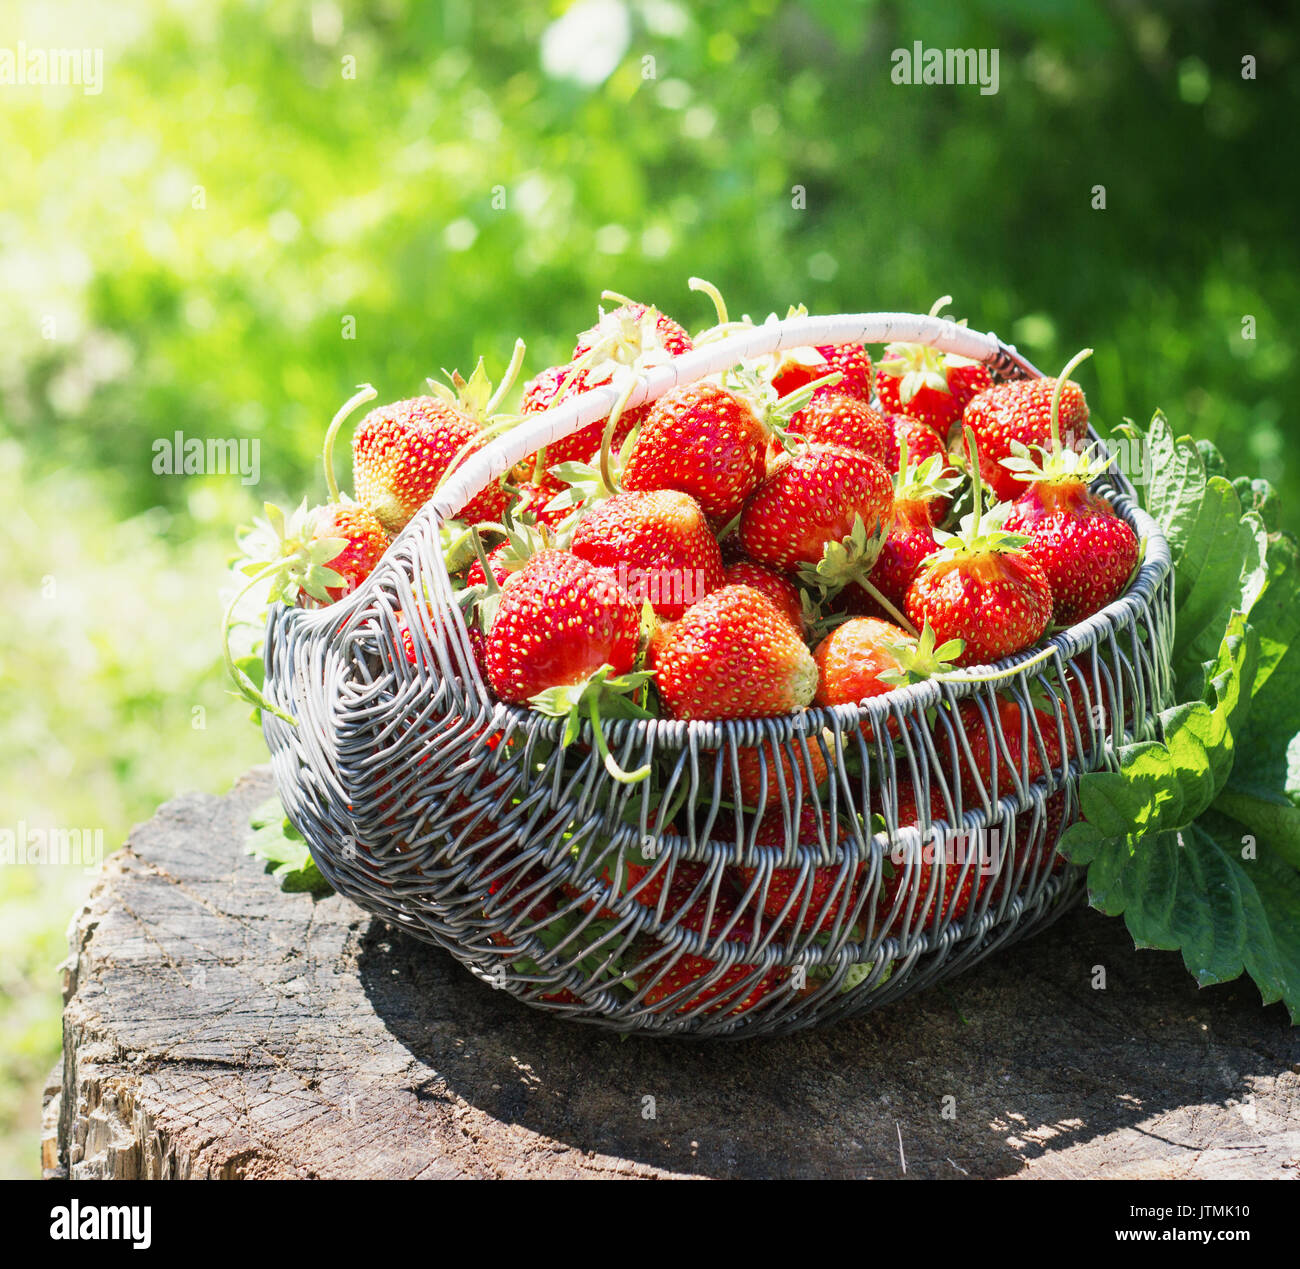 Ripe and tasty strawberries metal a basket on stump in the street on a bright sunny day garden Stock Photo